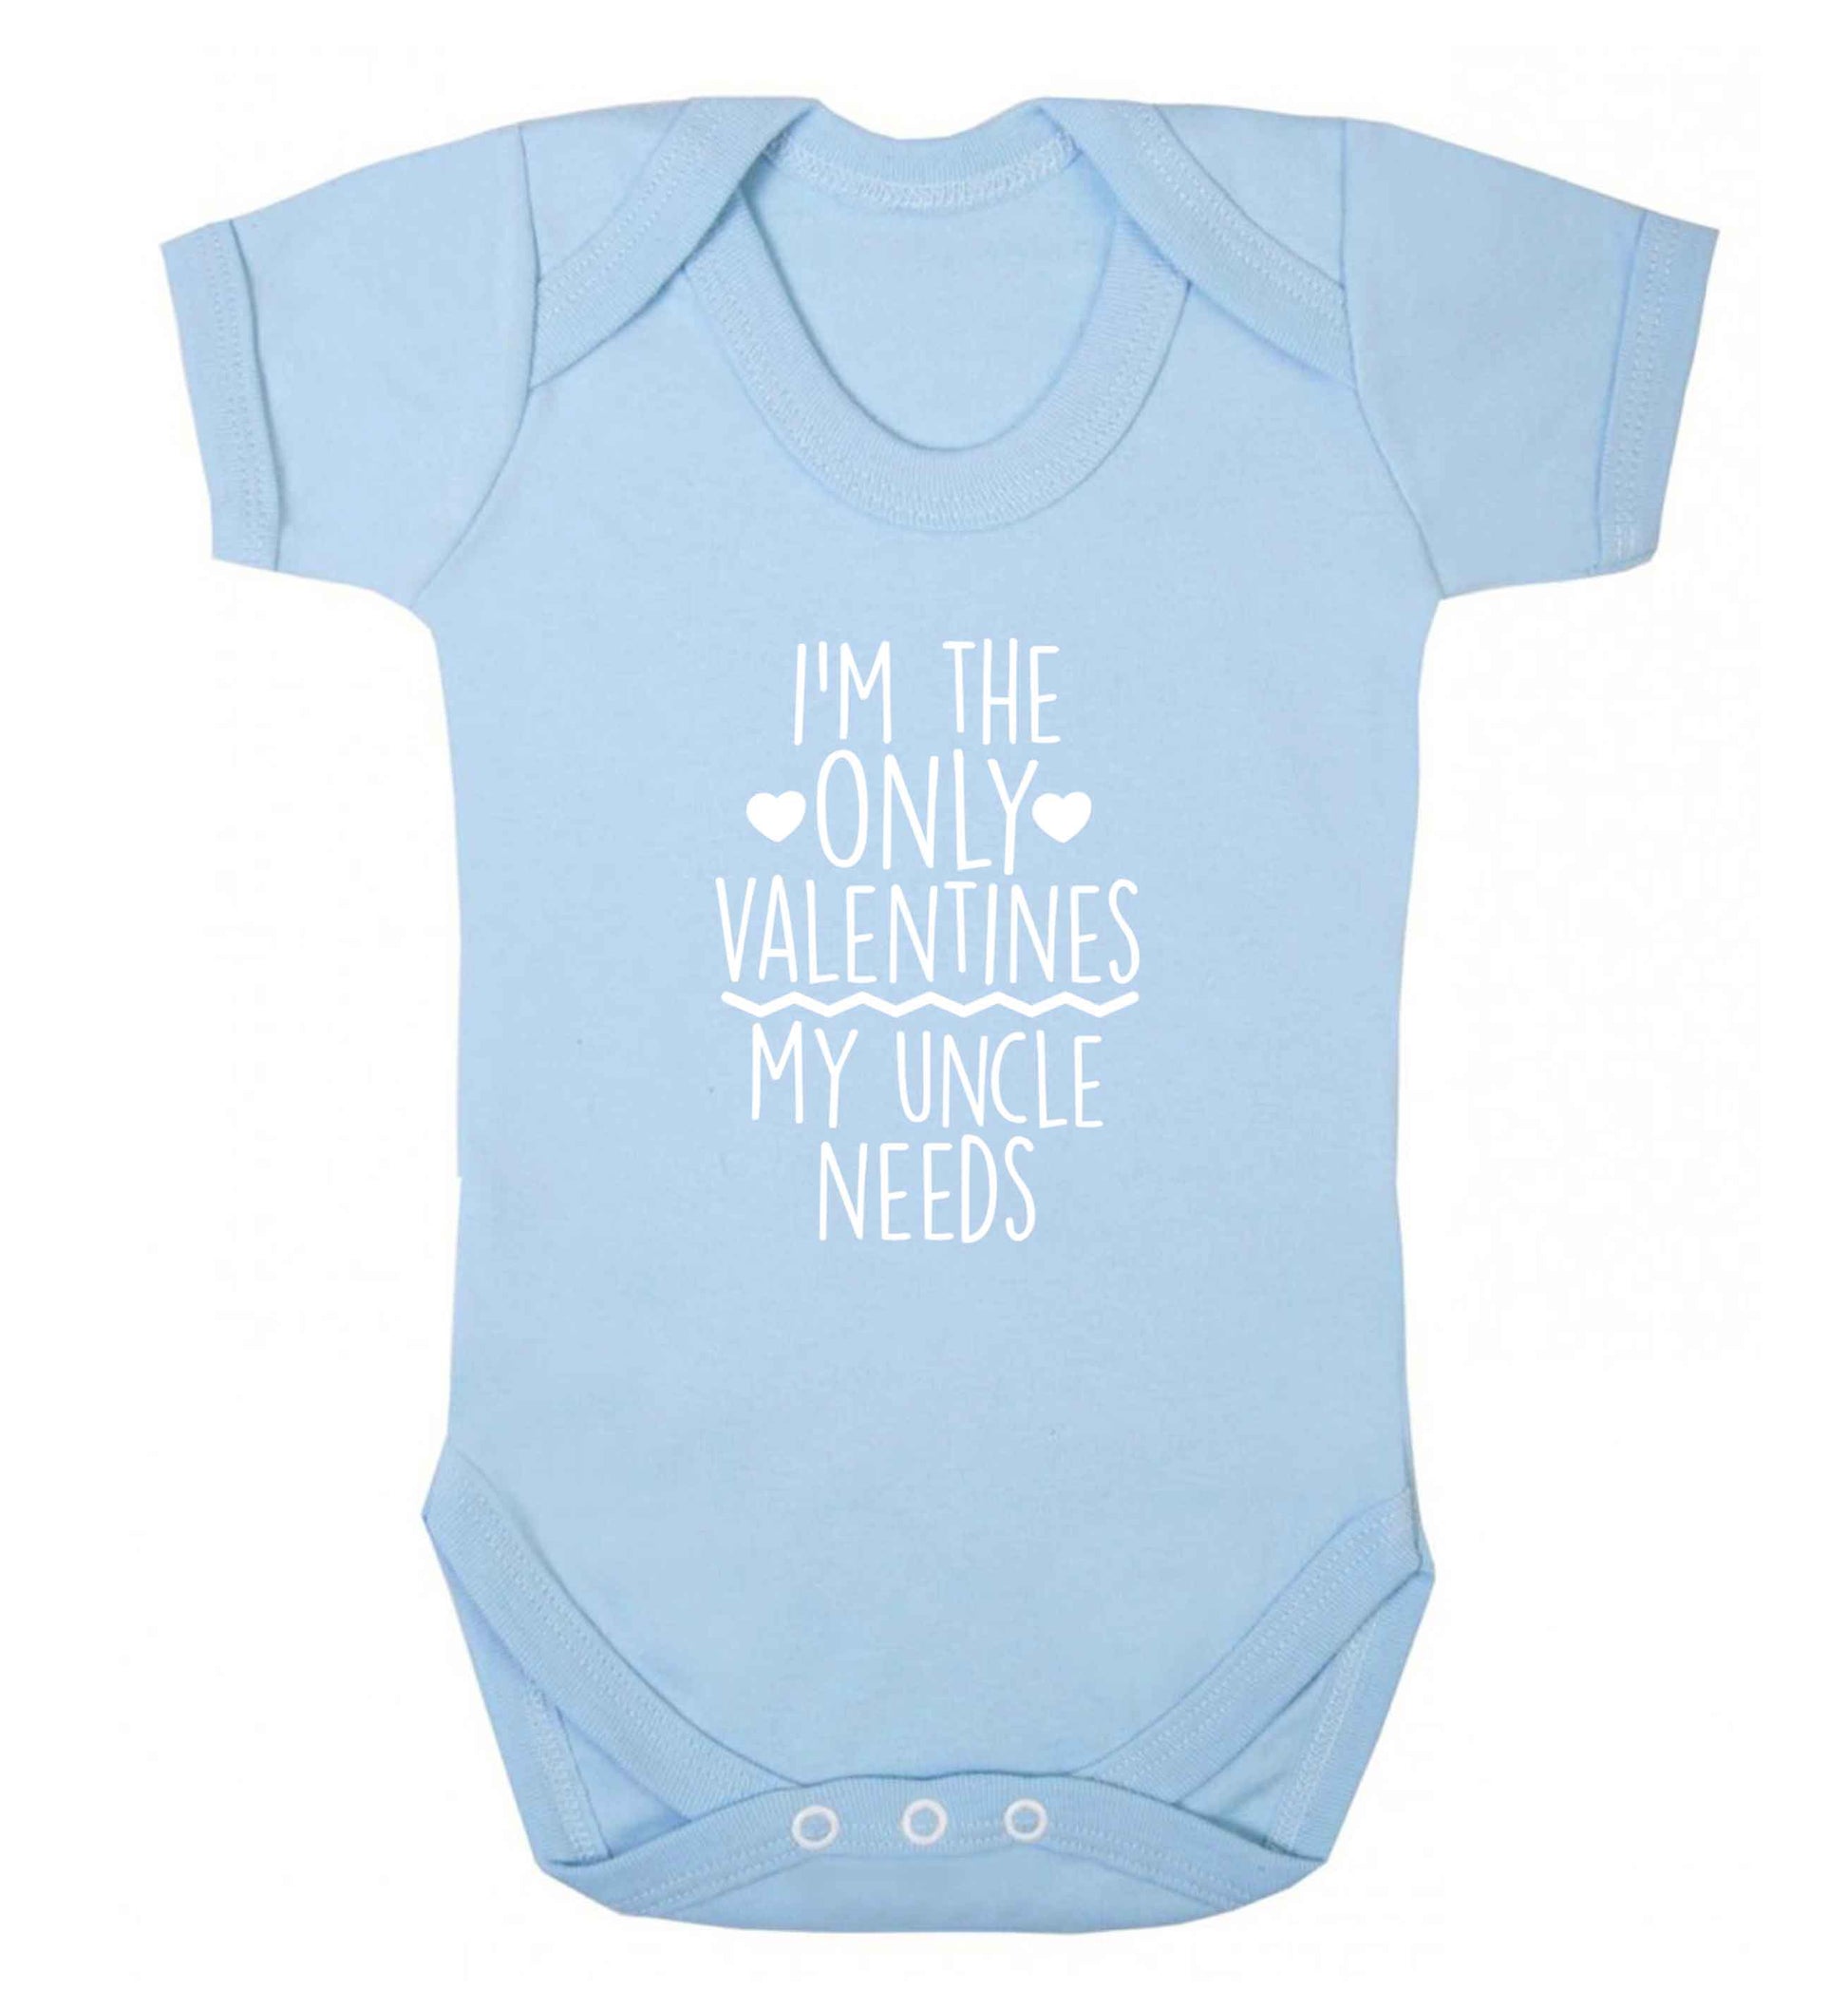 I'm the only valentines my uncle needs baby vest pale blue 18-24 months